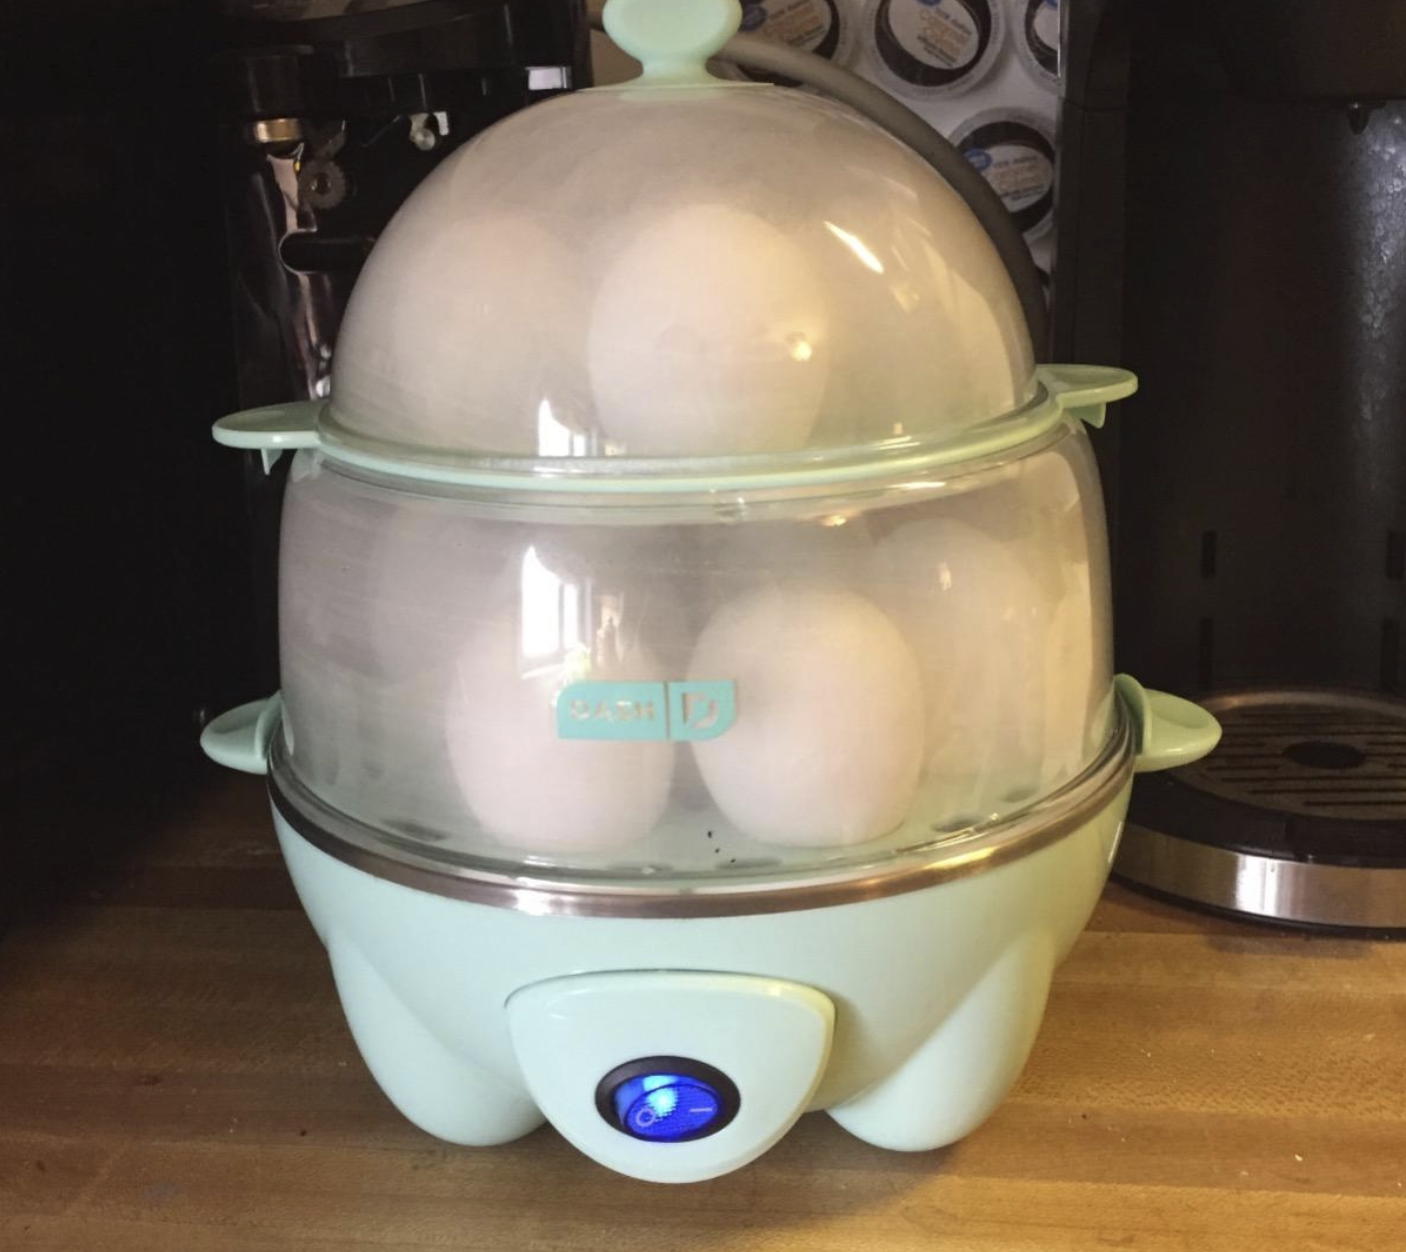 Dash Go Rapid Egg Cooker Review - Pros, Cons and Verdict